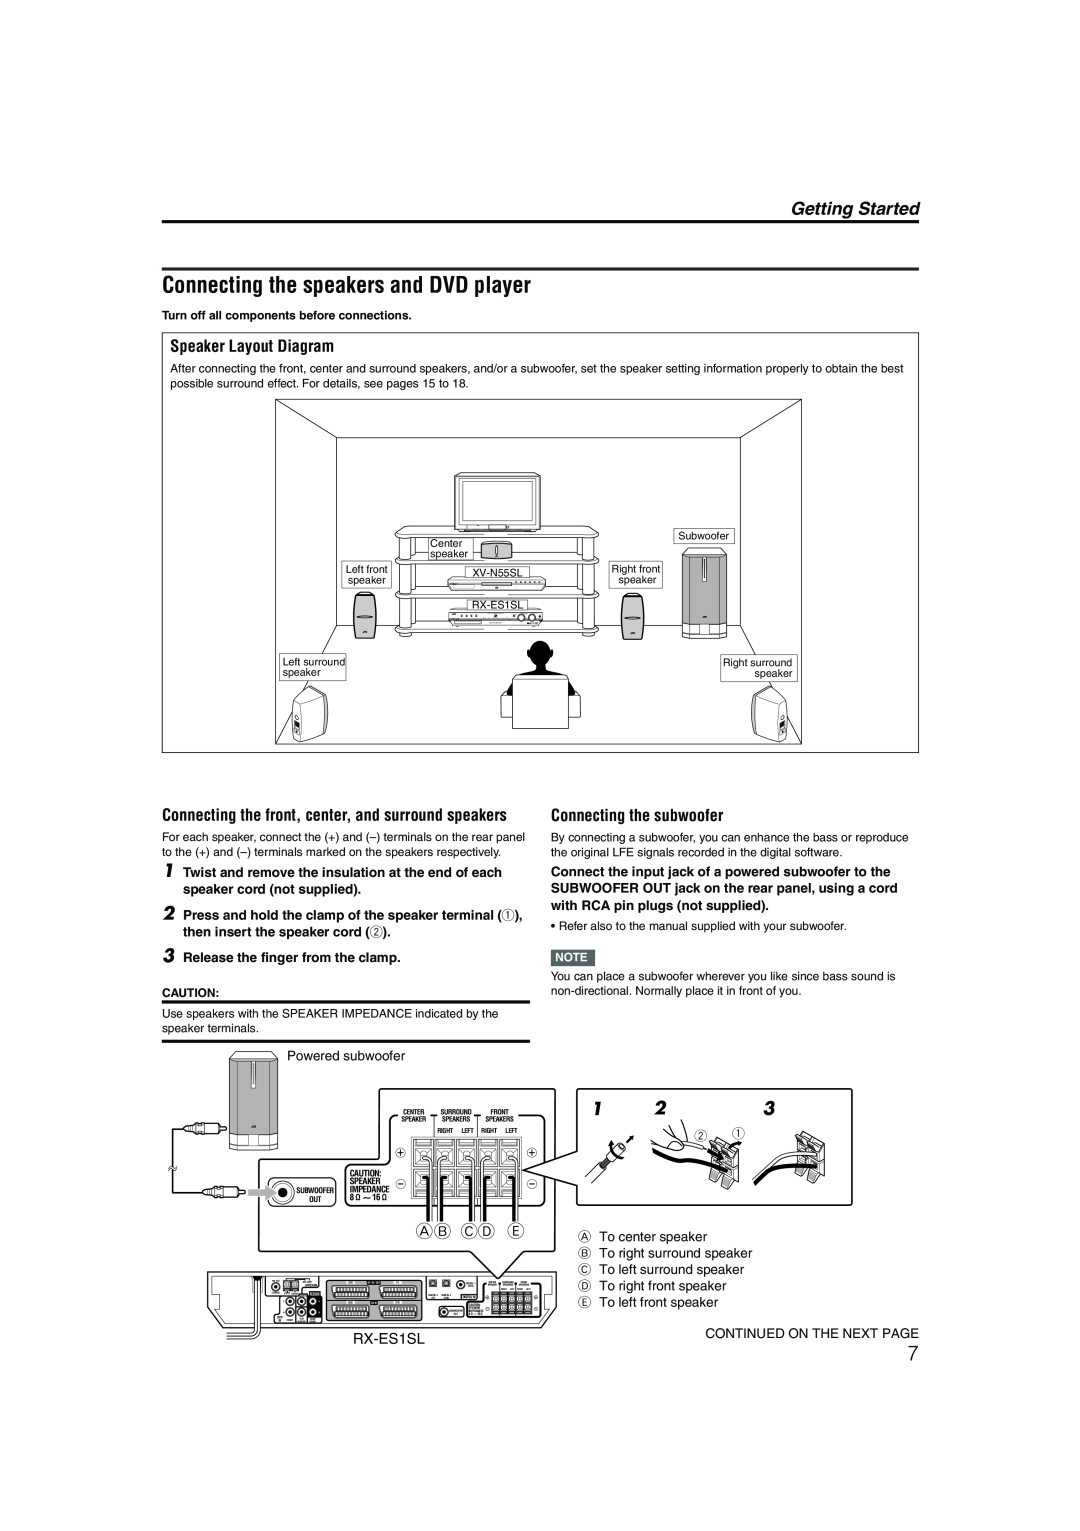 JVC LVT1002-001B Connecting the speakers and DVD player, Getting Started, Speaker Layout Diagram, Connecting the subwoofer 